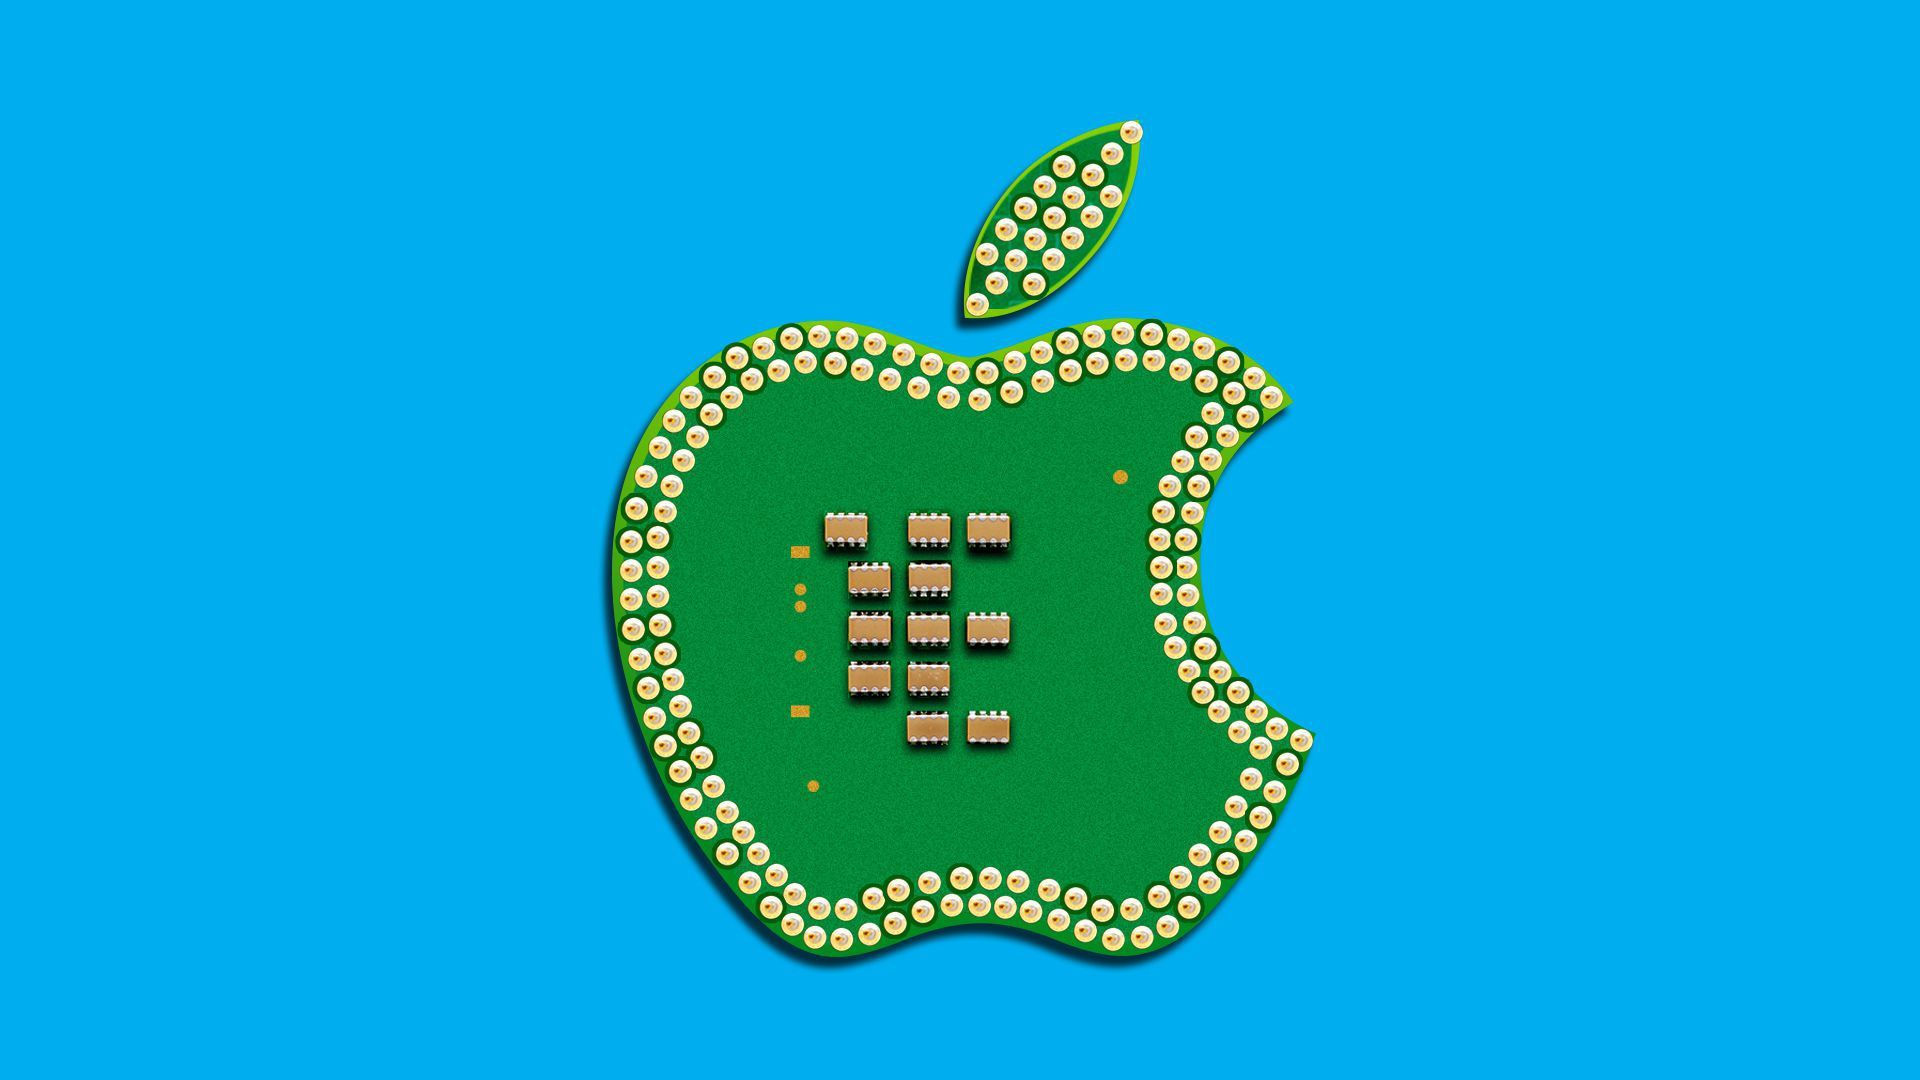 Illustration showing the Apple symbol with chips.